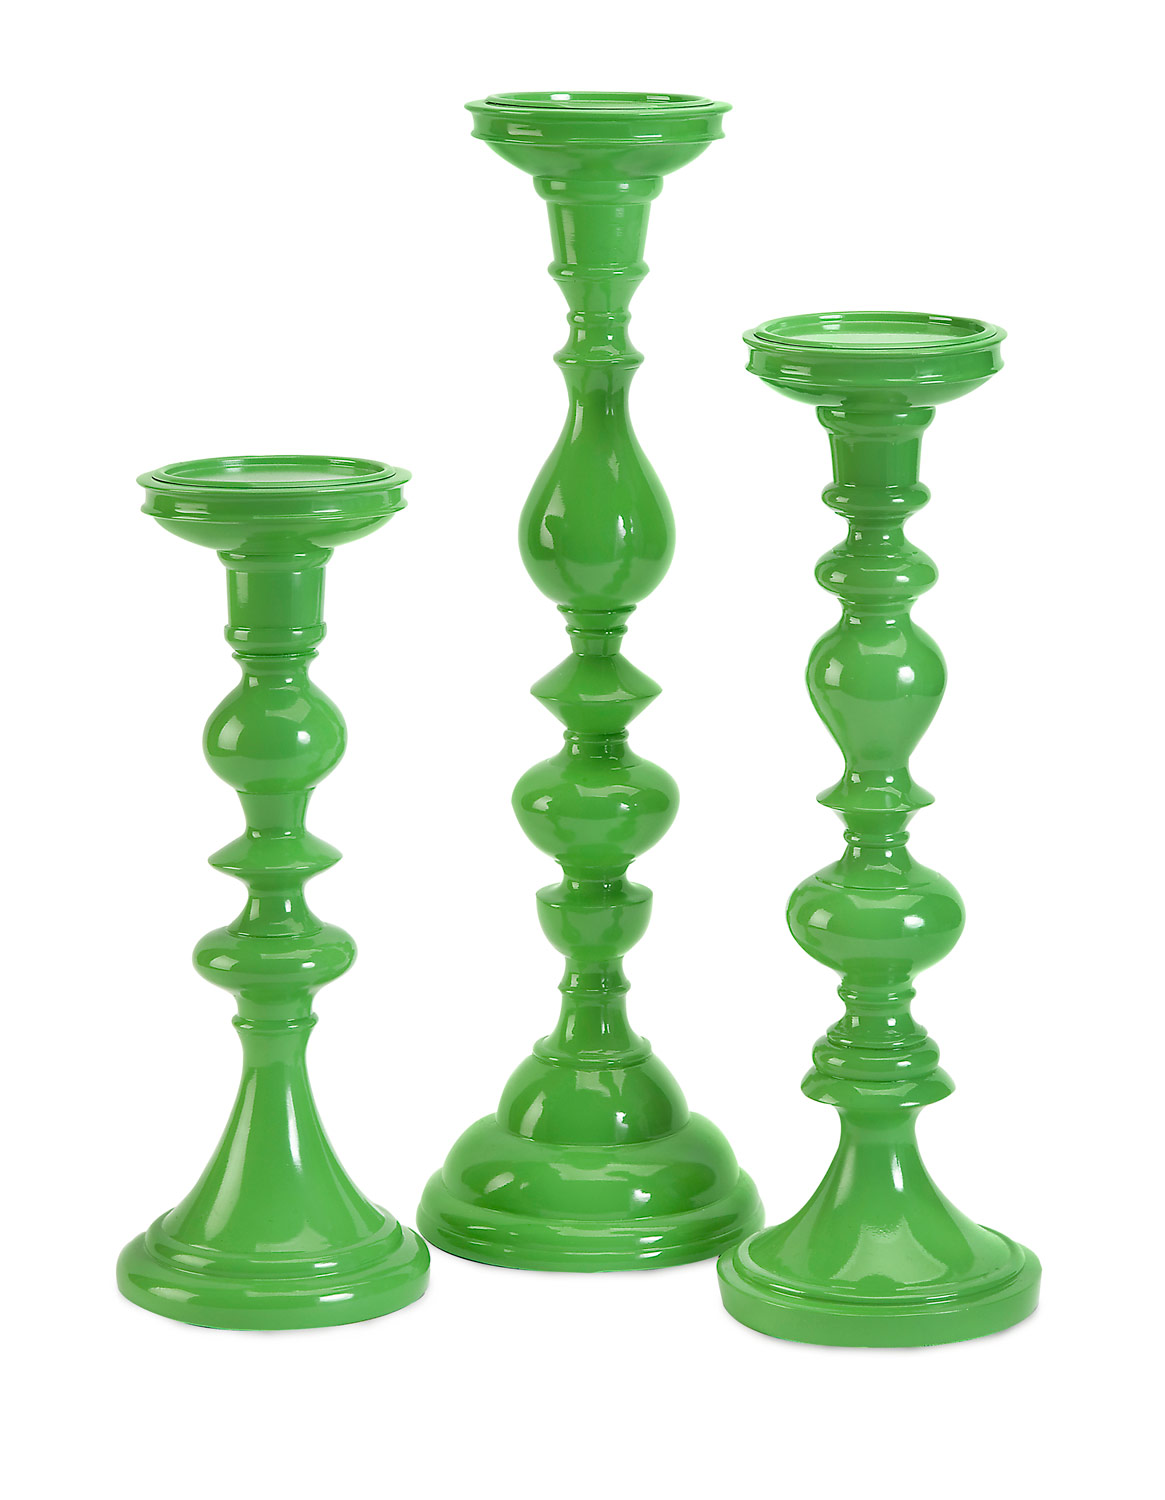 IMAX Essential Green Candle Holders - Set of 3